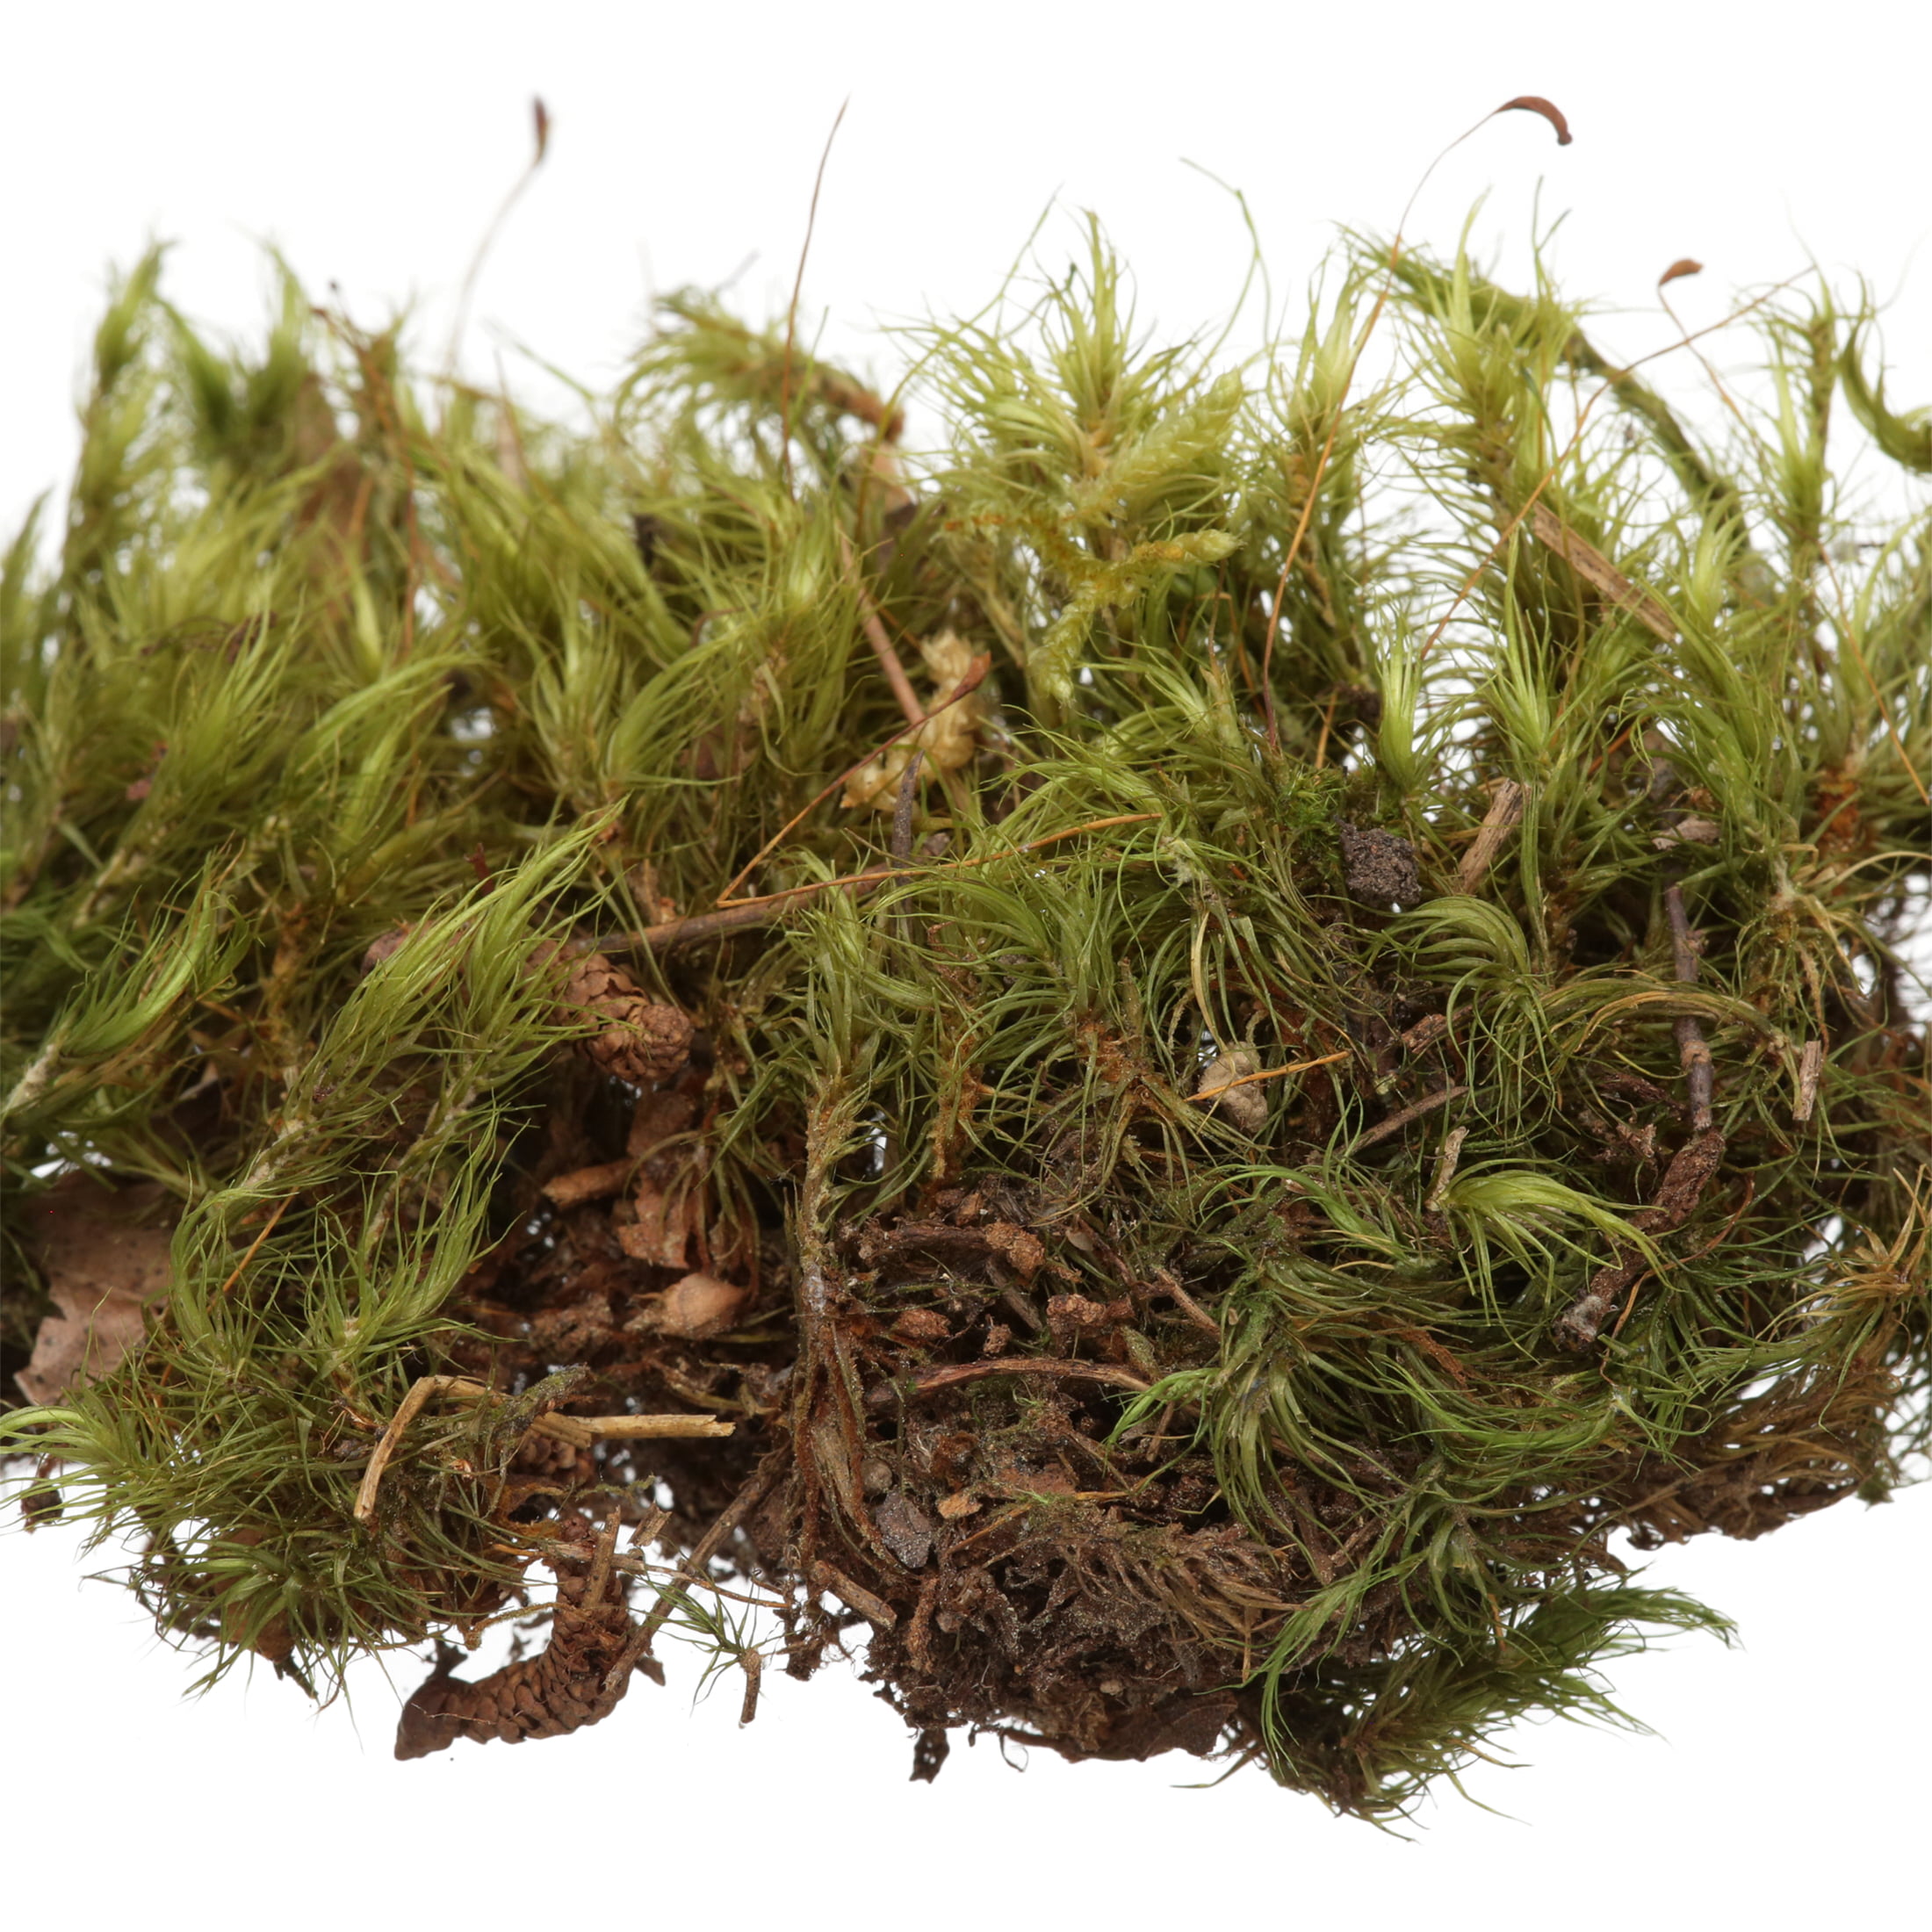 Live Assortment of Moss For Terrarium Sustainably Harvested